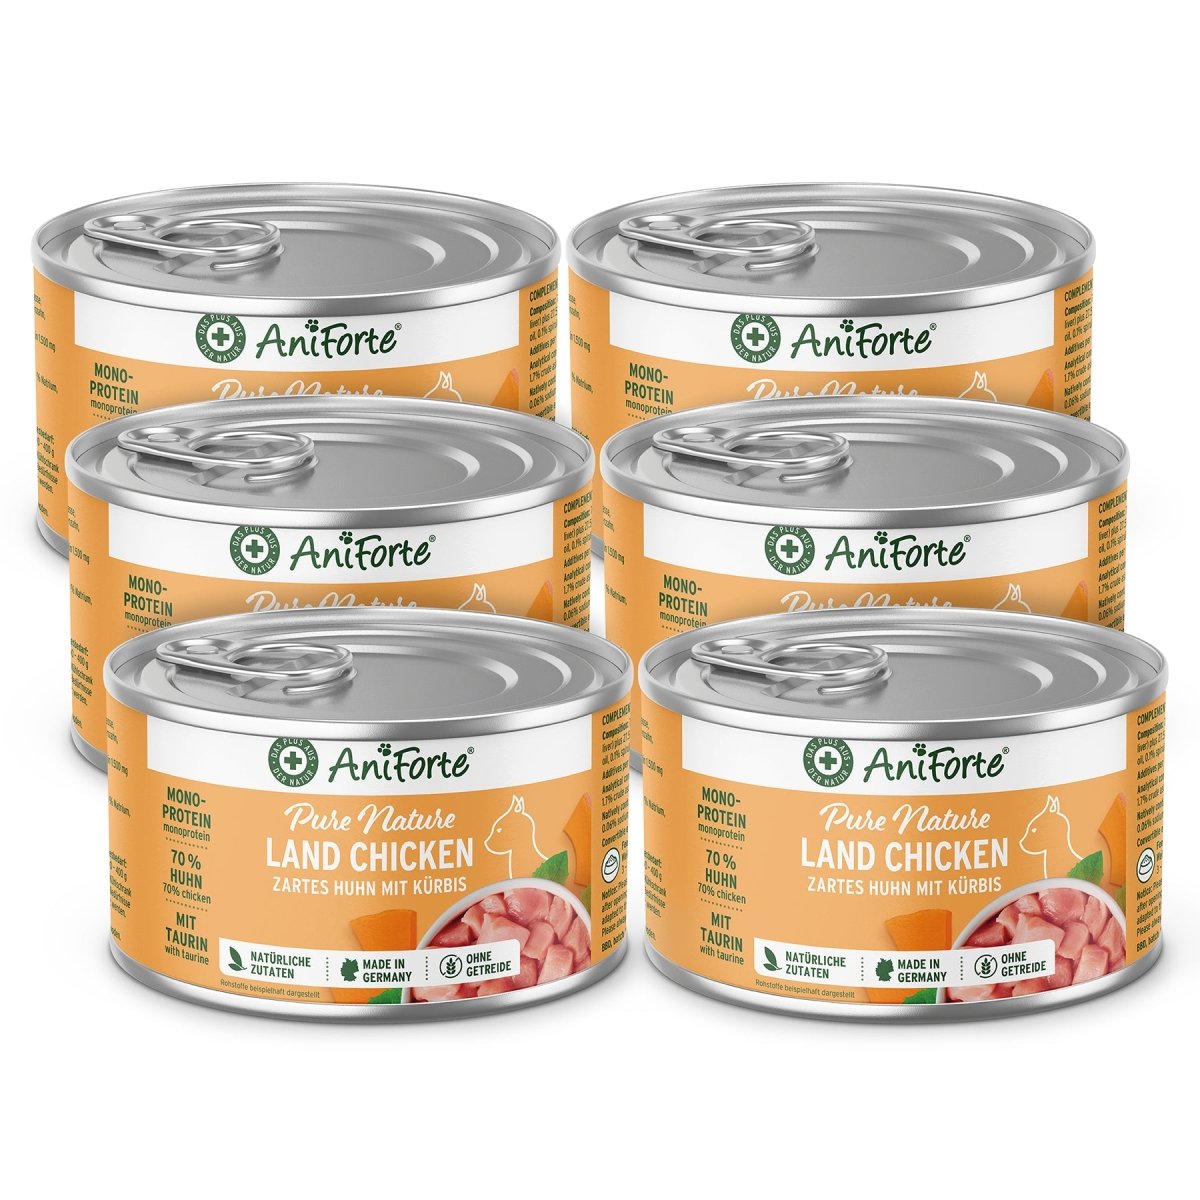 PureNature Country Chicken - Wet Food for Cats - AniForte UK